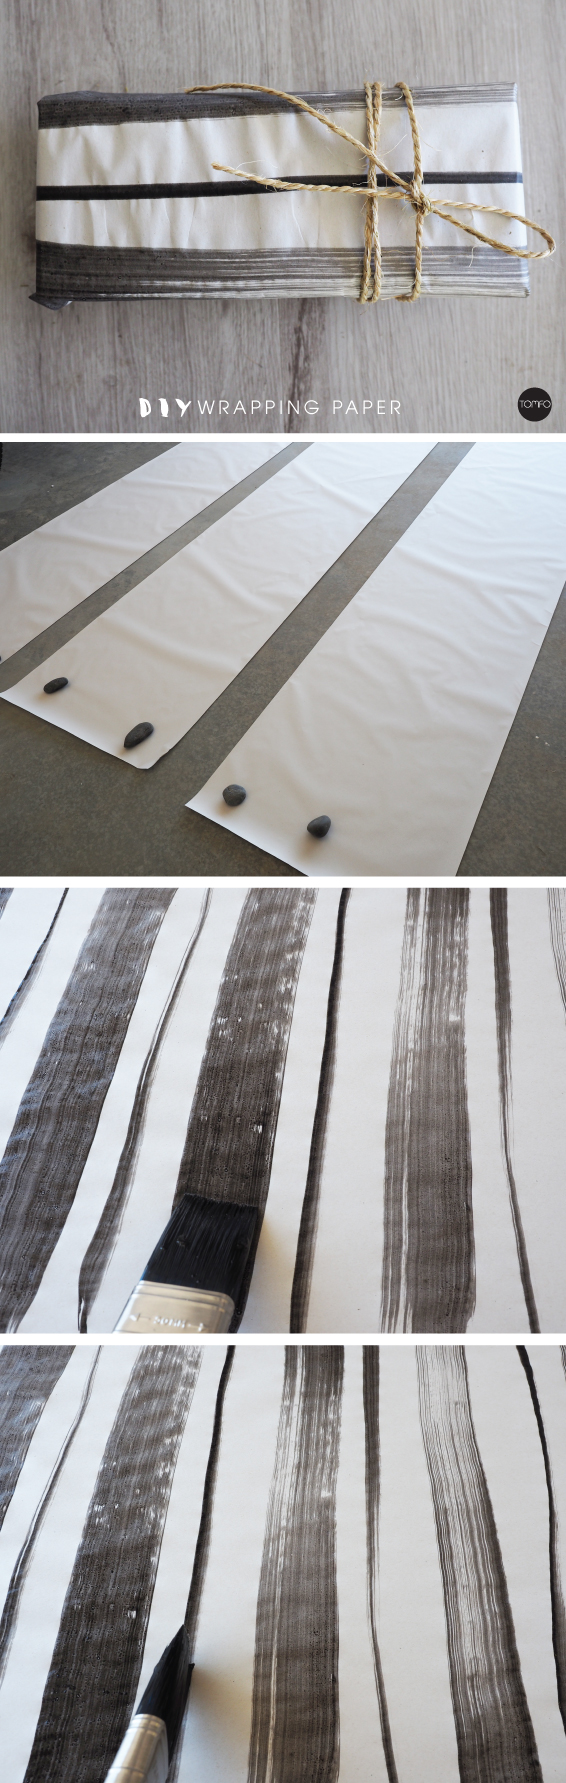 super-easy-diy-wrapping-paper-tomfo